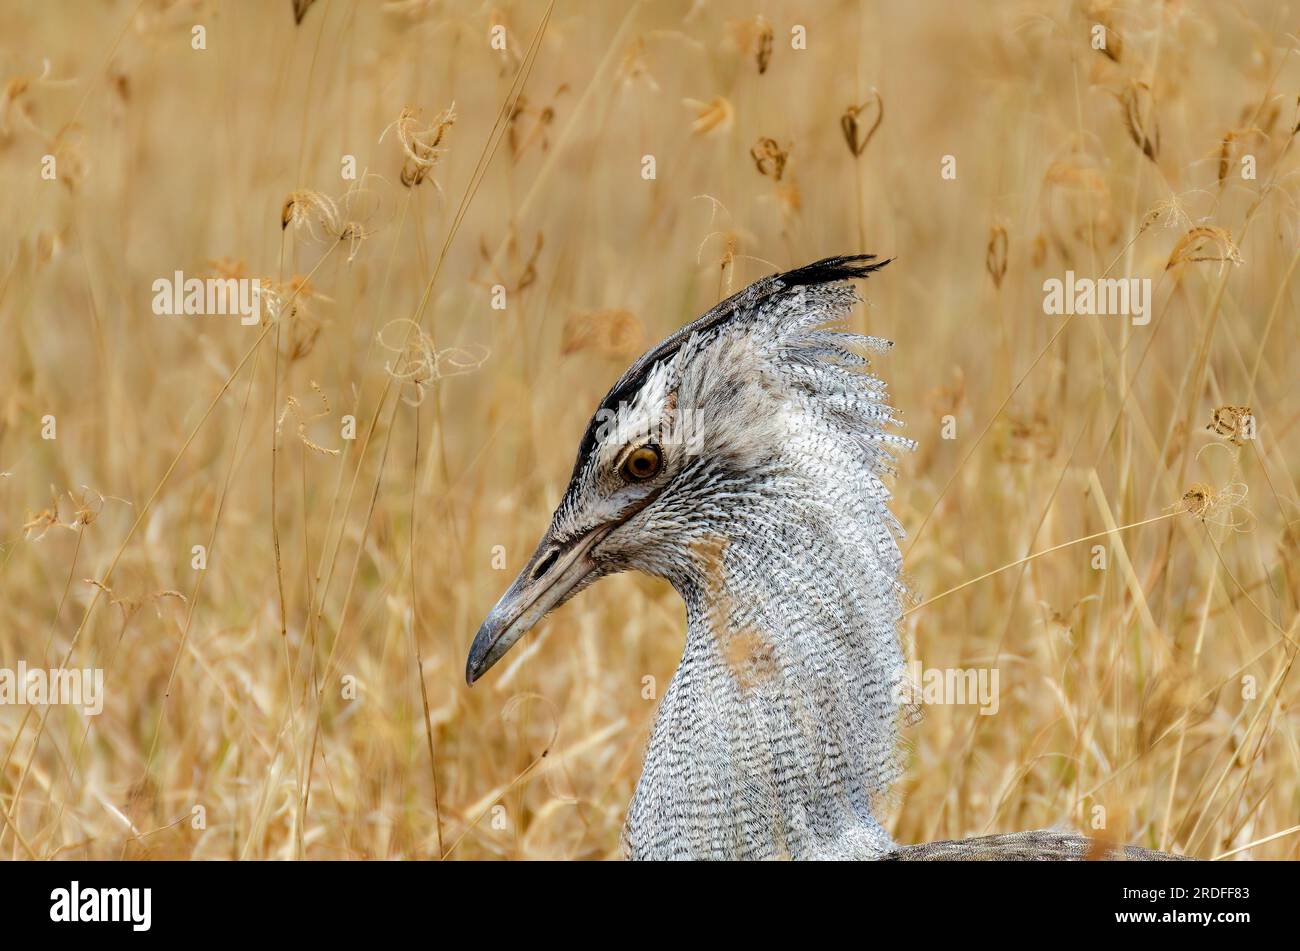 PHOTOGRAPH OF A KORI BUSTARD TAKEN FROM A TOYOTA LAND CRUISER IN THE NGORONGORO CONSERVATION AREA IN TANZANIA IN AUGUST 2022 Stock Photo